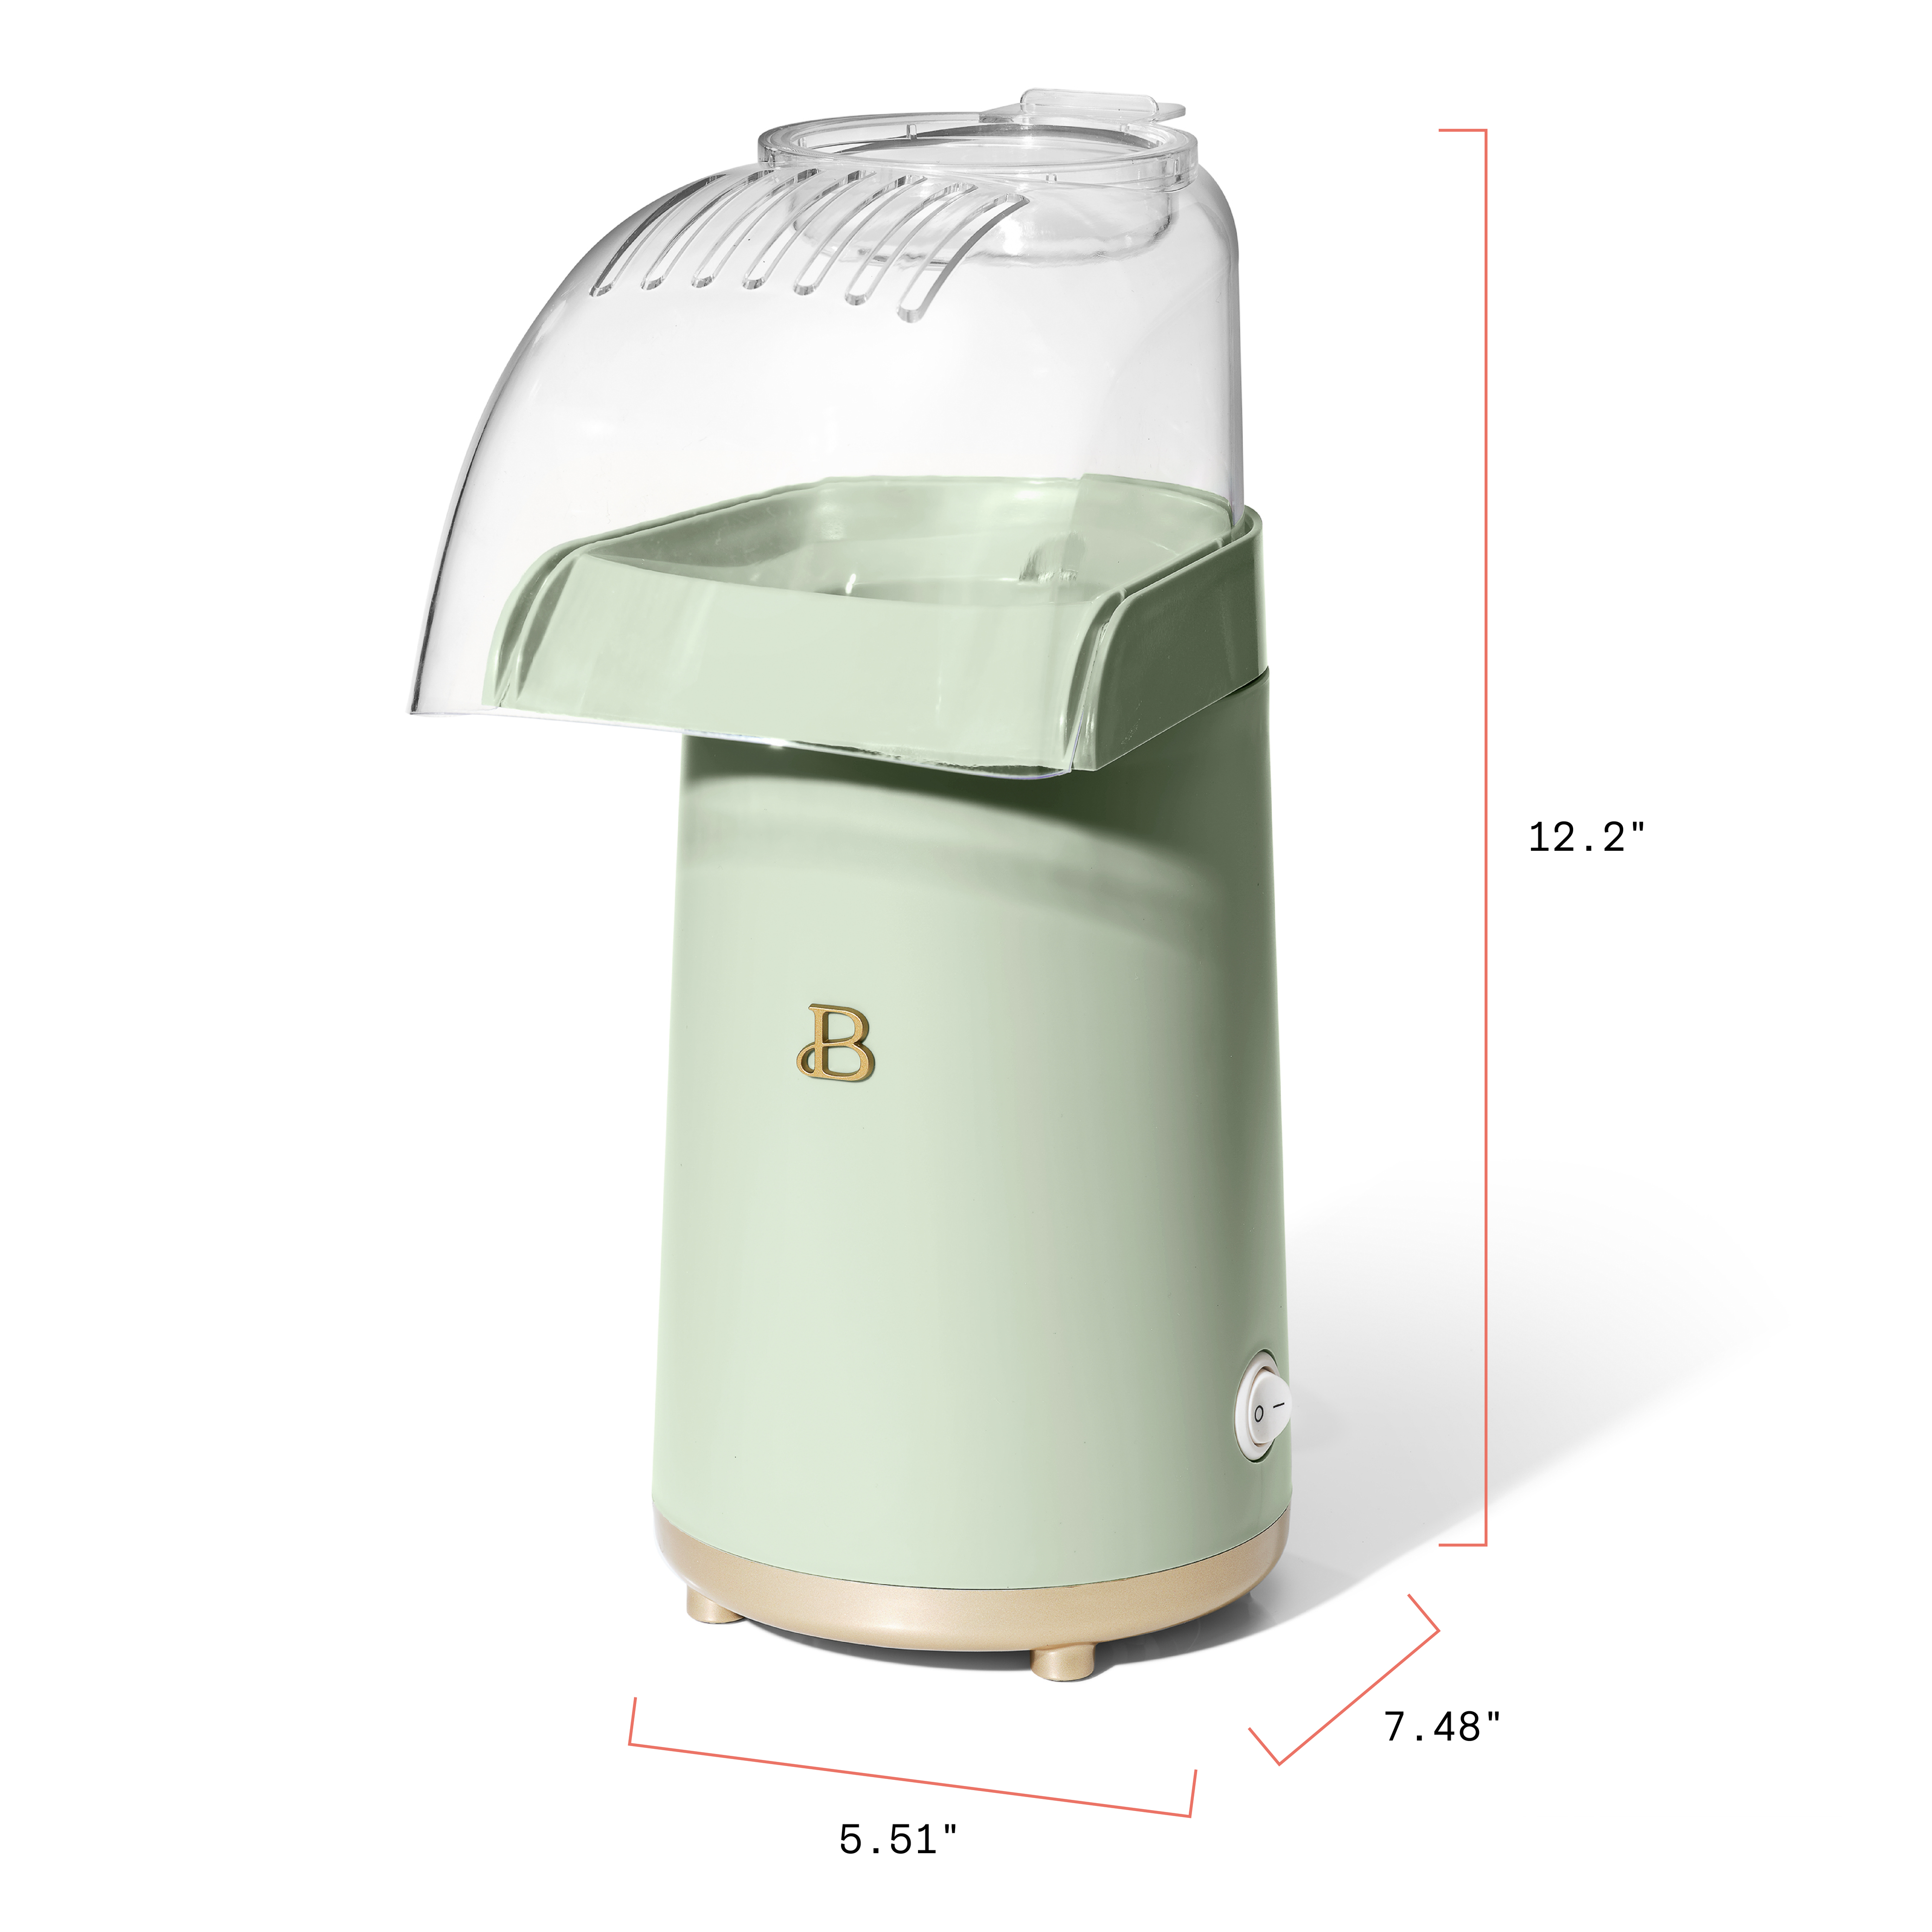 Beautiful 16 Cup Hot Air Electric Popcorn Maker, Sage Green by Drew Barrymore - image 10 of 13